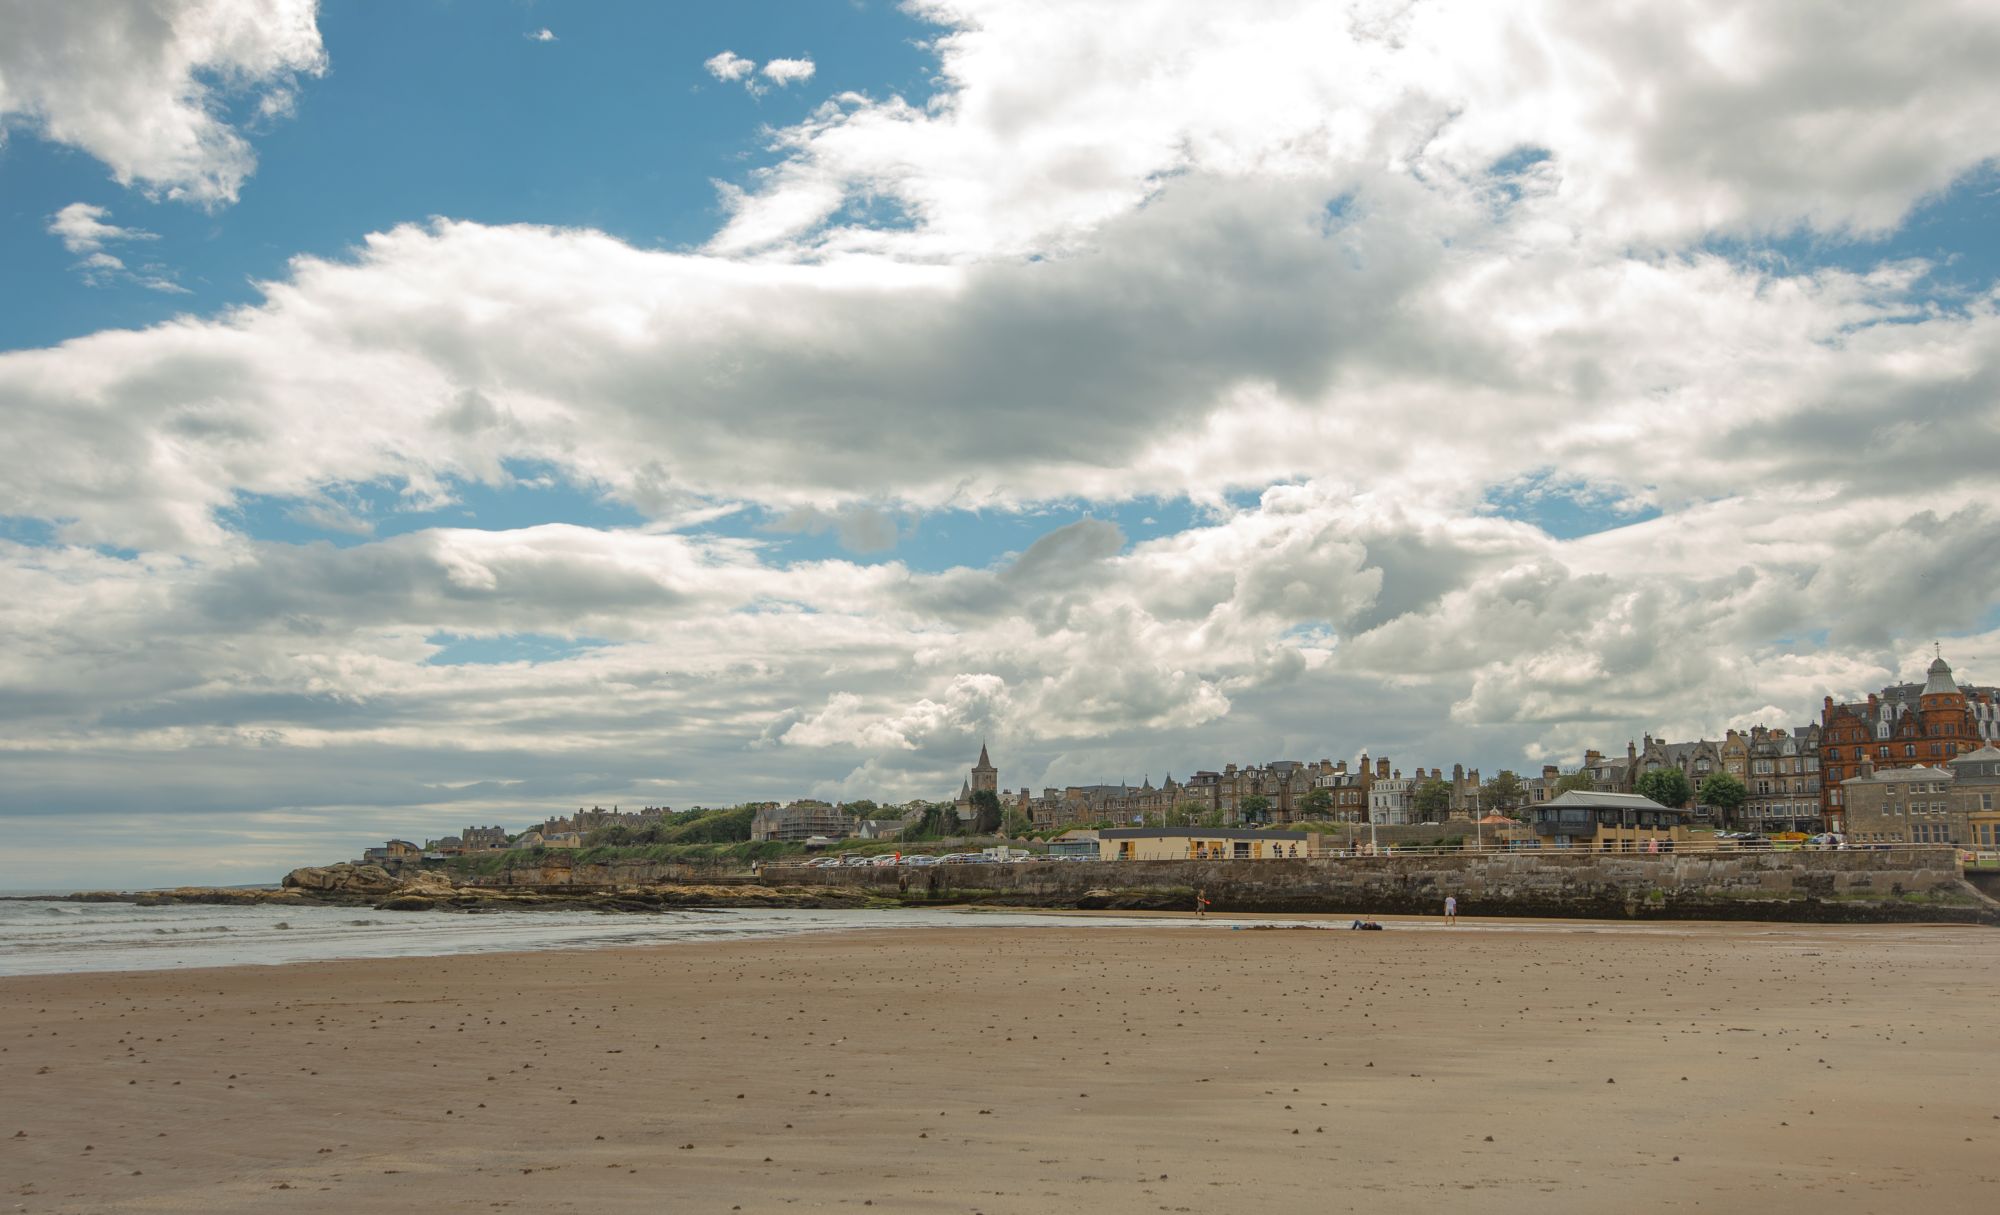 View of the town of St Andrews from West Sands beach.